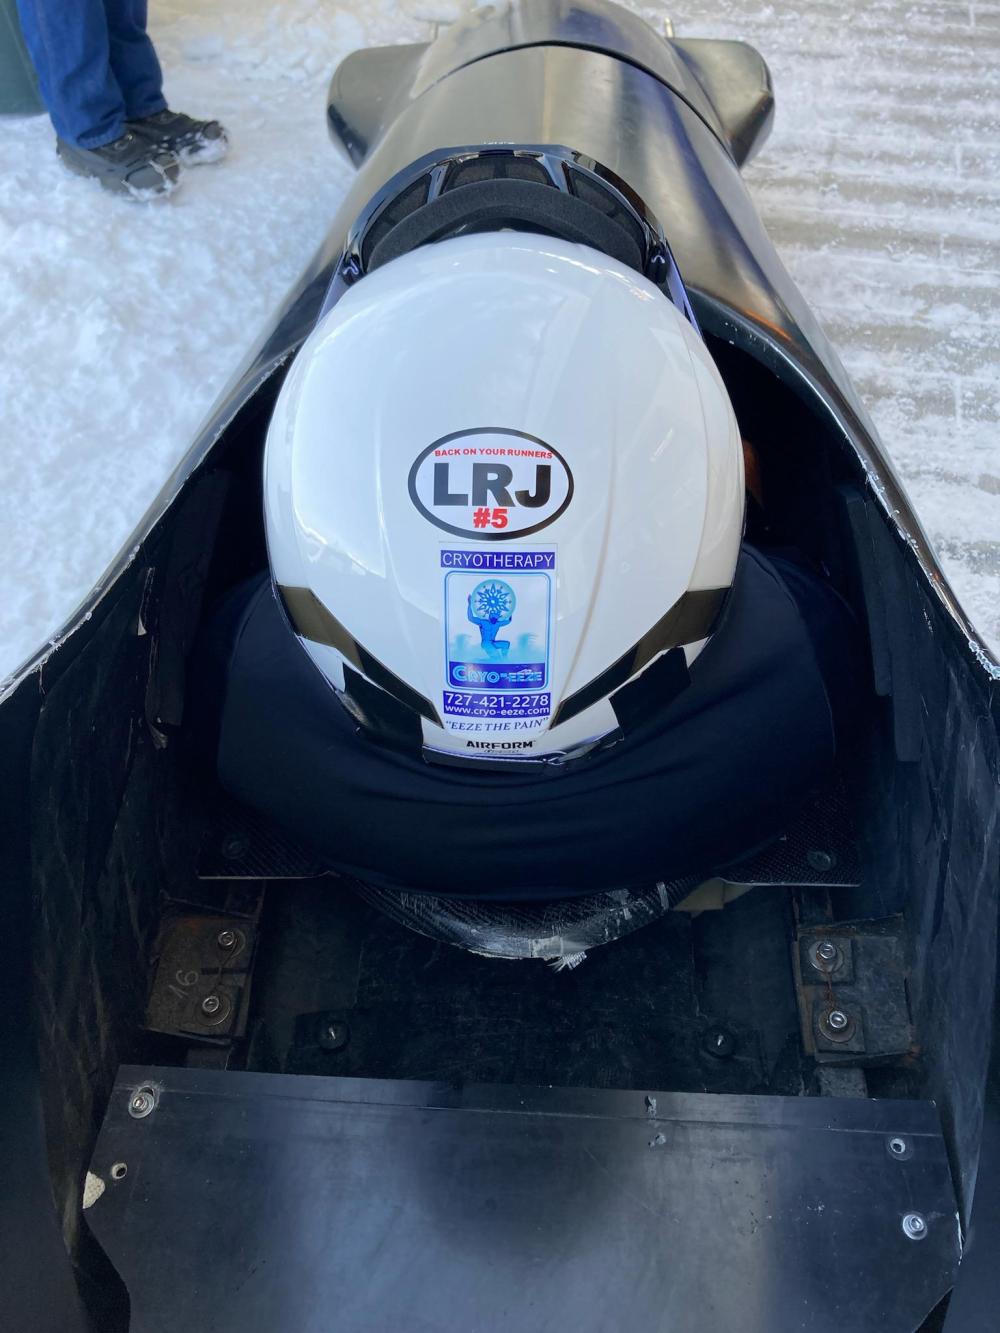 David Christopher in his bobsled awaiting his turn to go down the track in Lake Placid. A picture of David Christopher in November 2010. He was a US Army Captain with the 414th Civil Affairs Battalion as part of the United States Civil Affairs and Psychological Operations Command. Image courtesy of David Christopher.